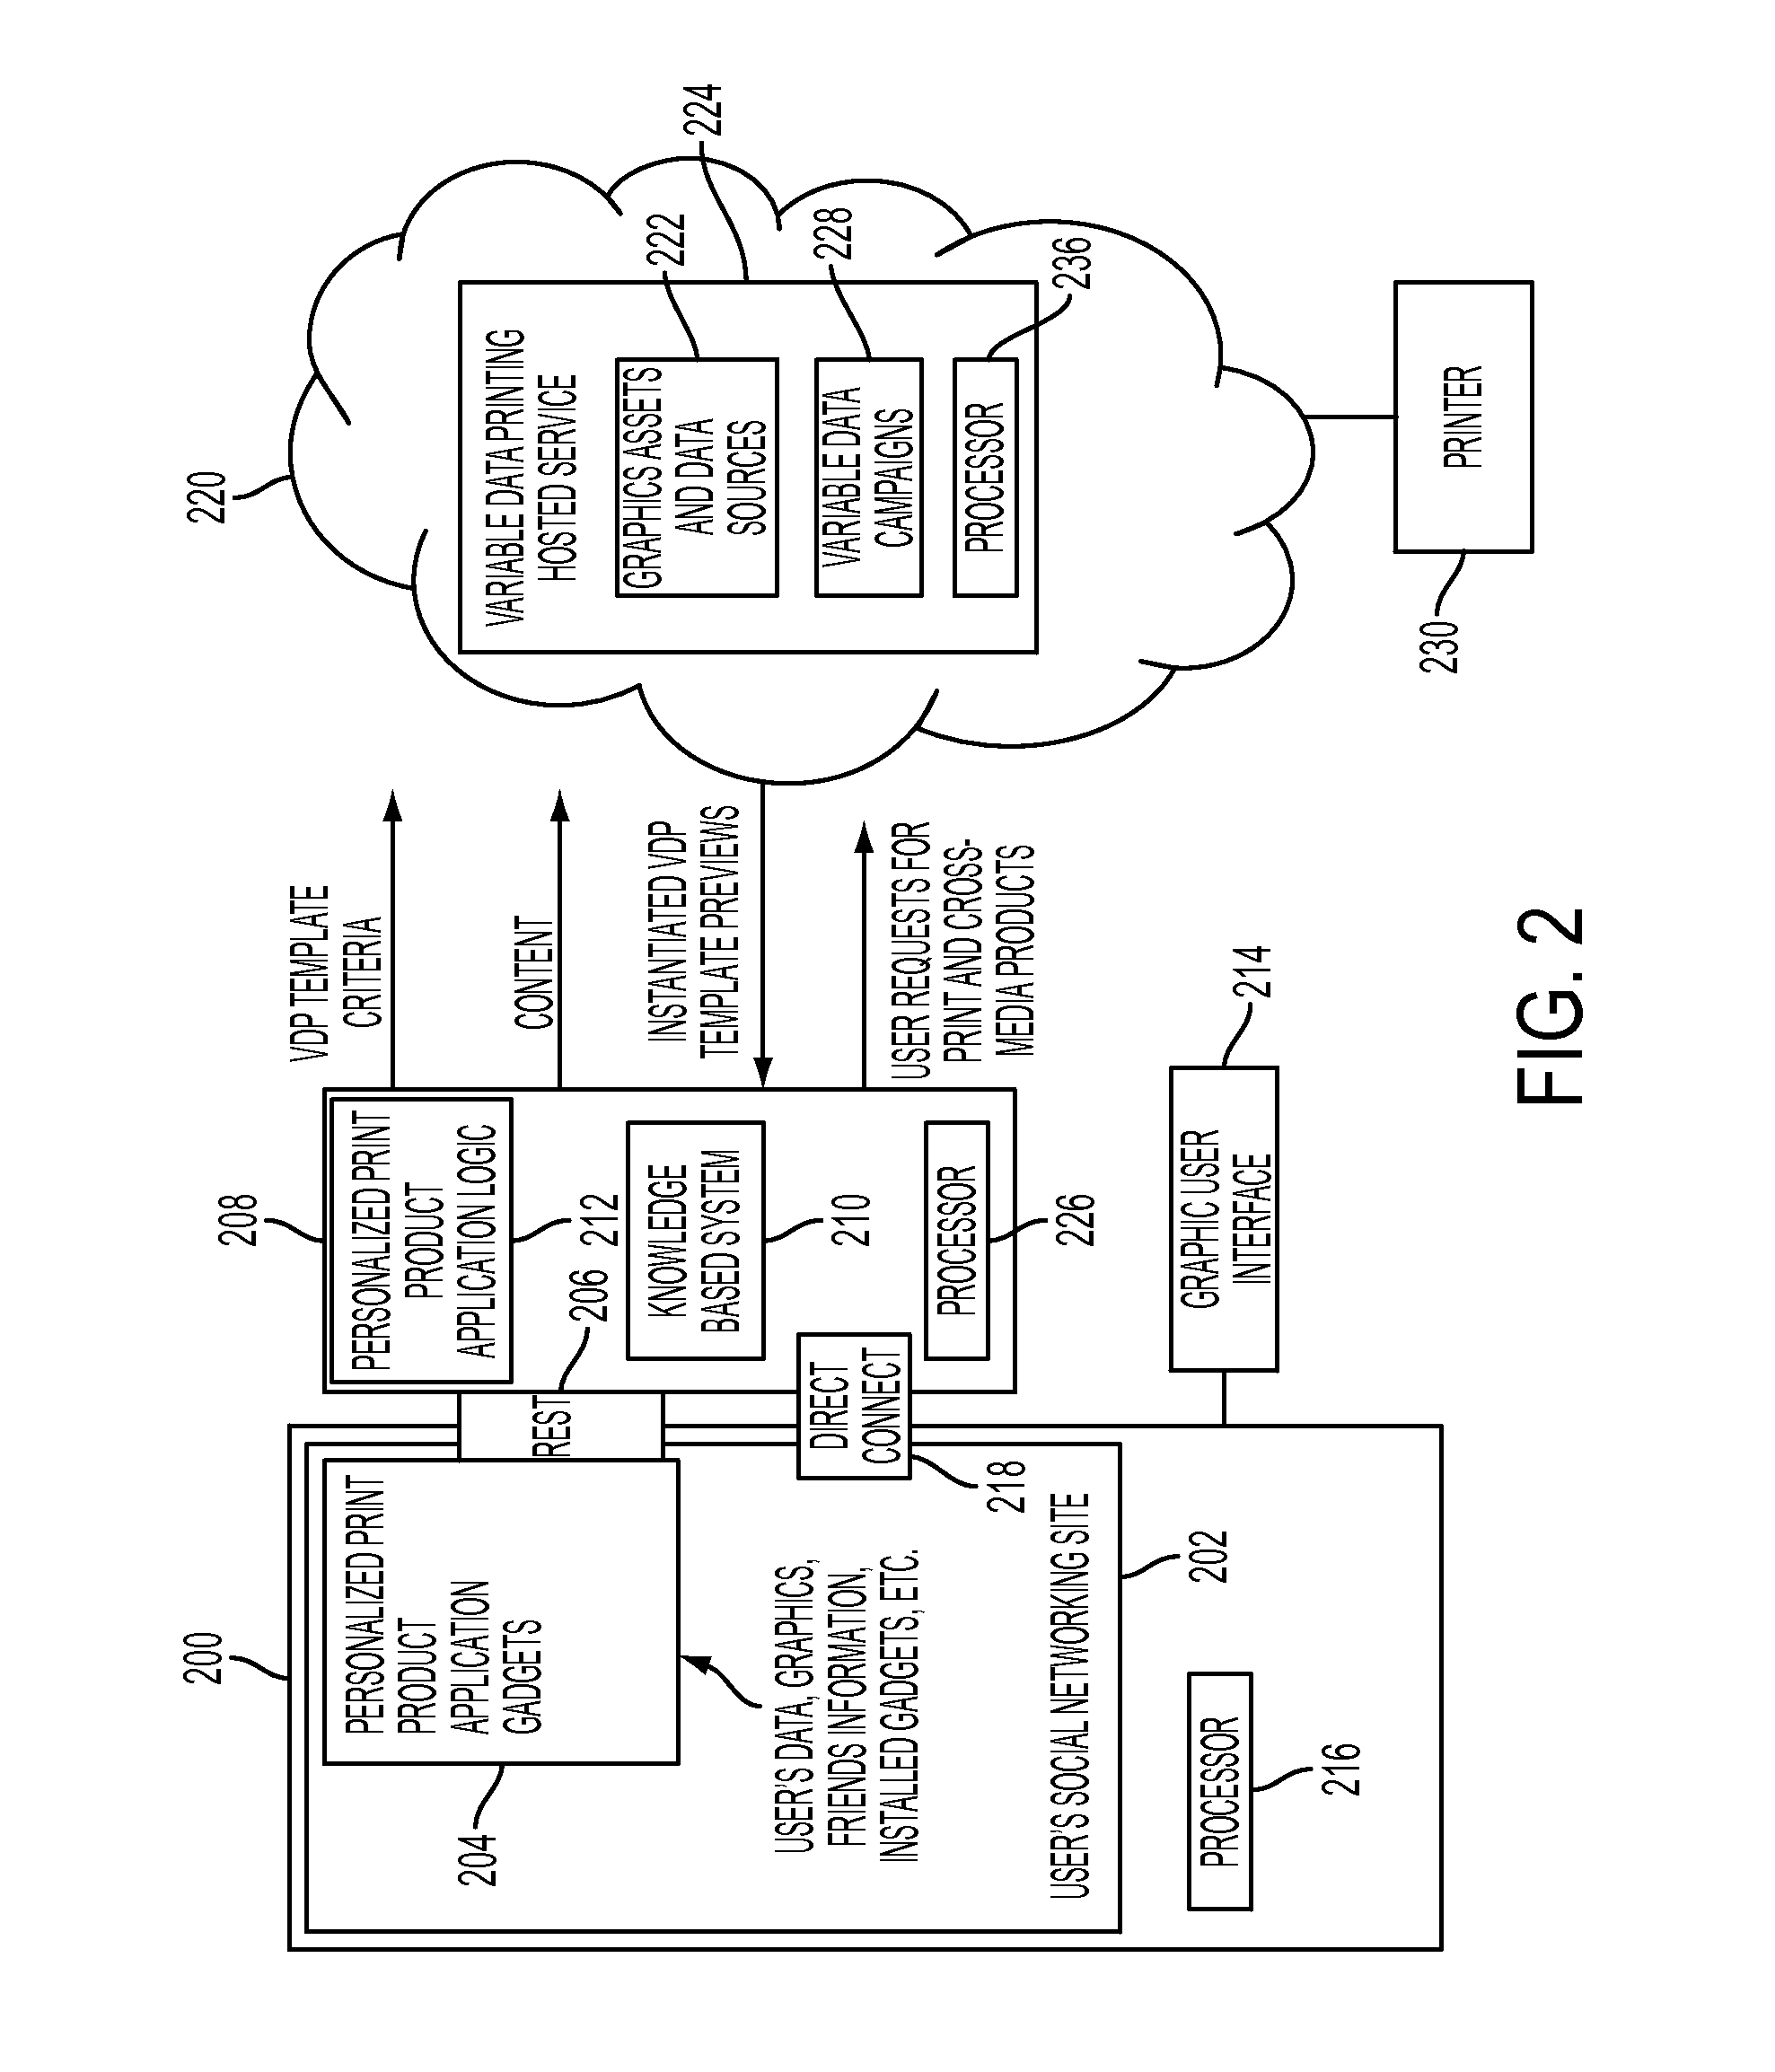 Knowledge-based method for using social networking site content in variable data applications